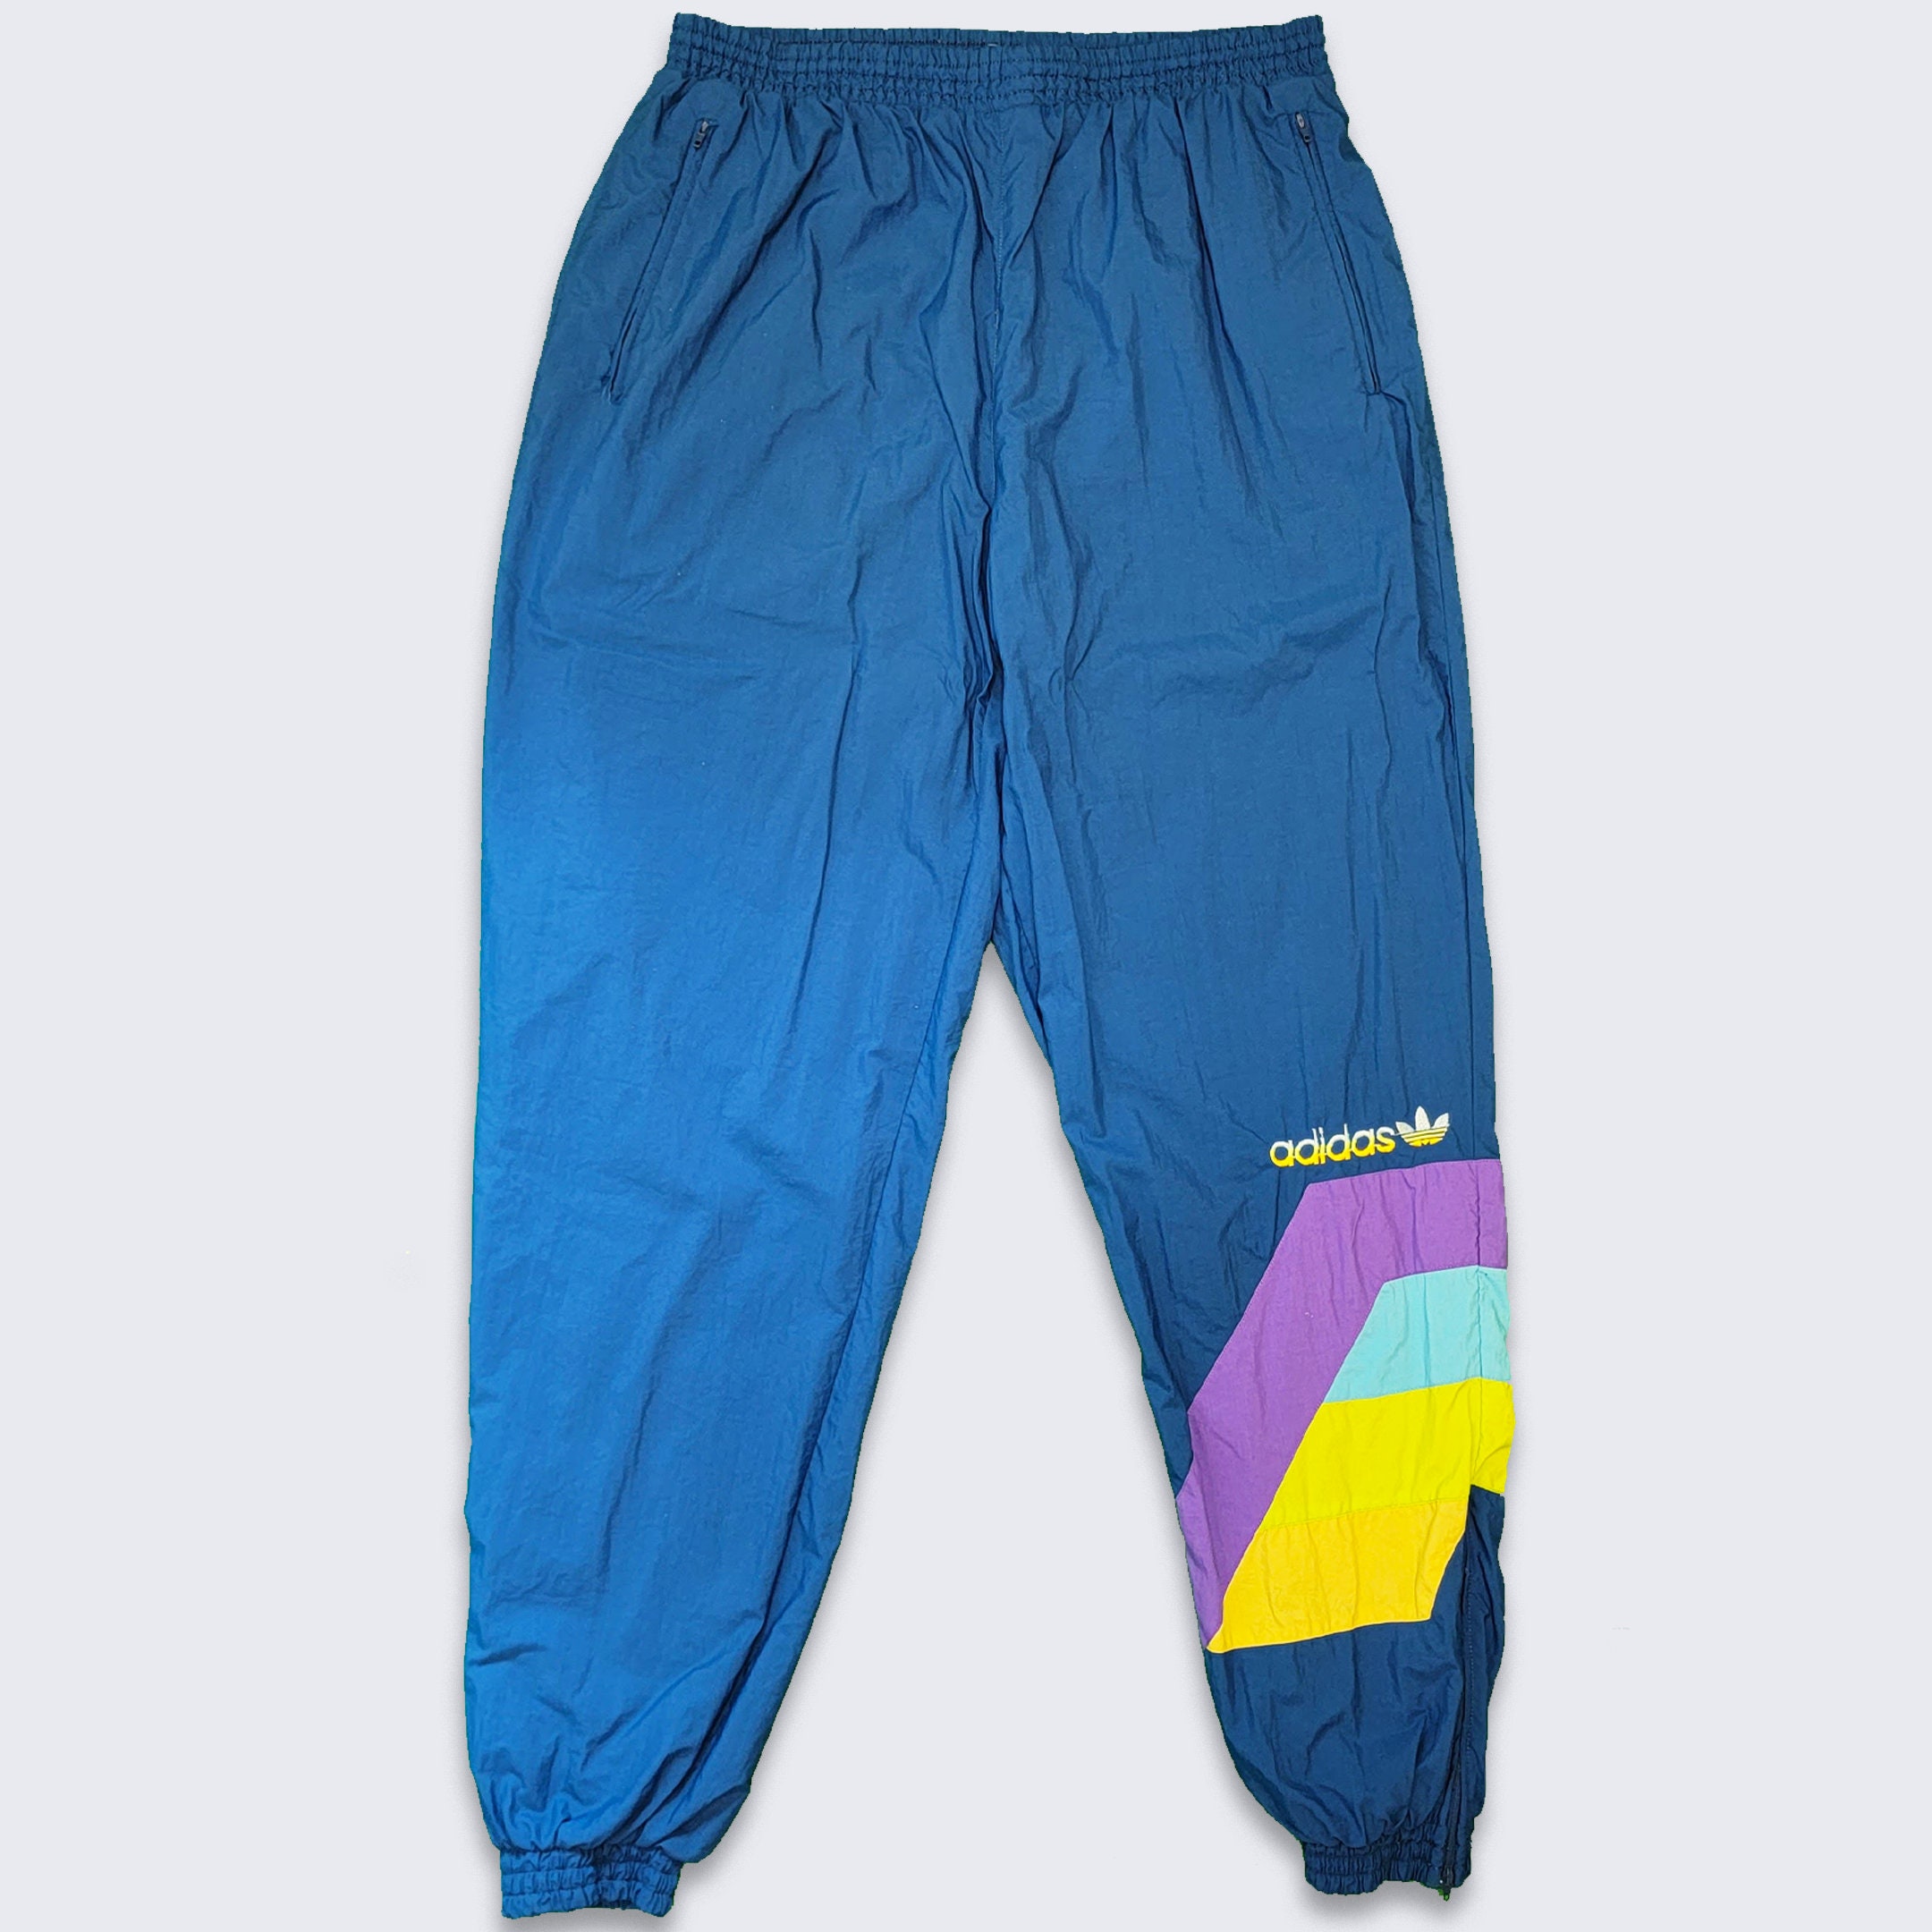 Adidas Vintage 90s Color Joggers Pants Blue and Green - Etsy